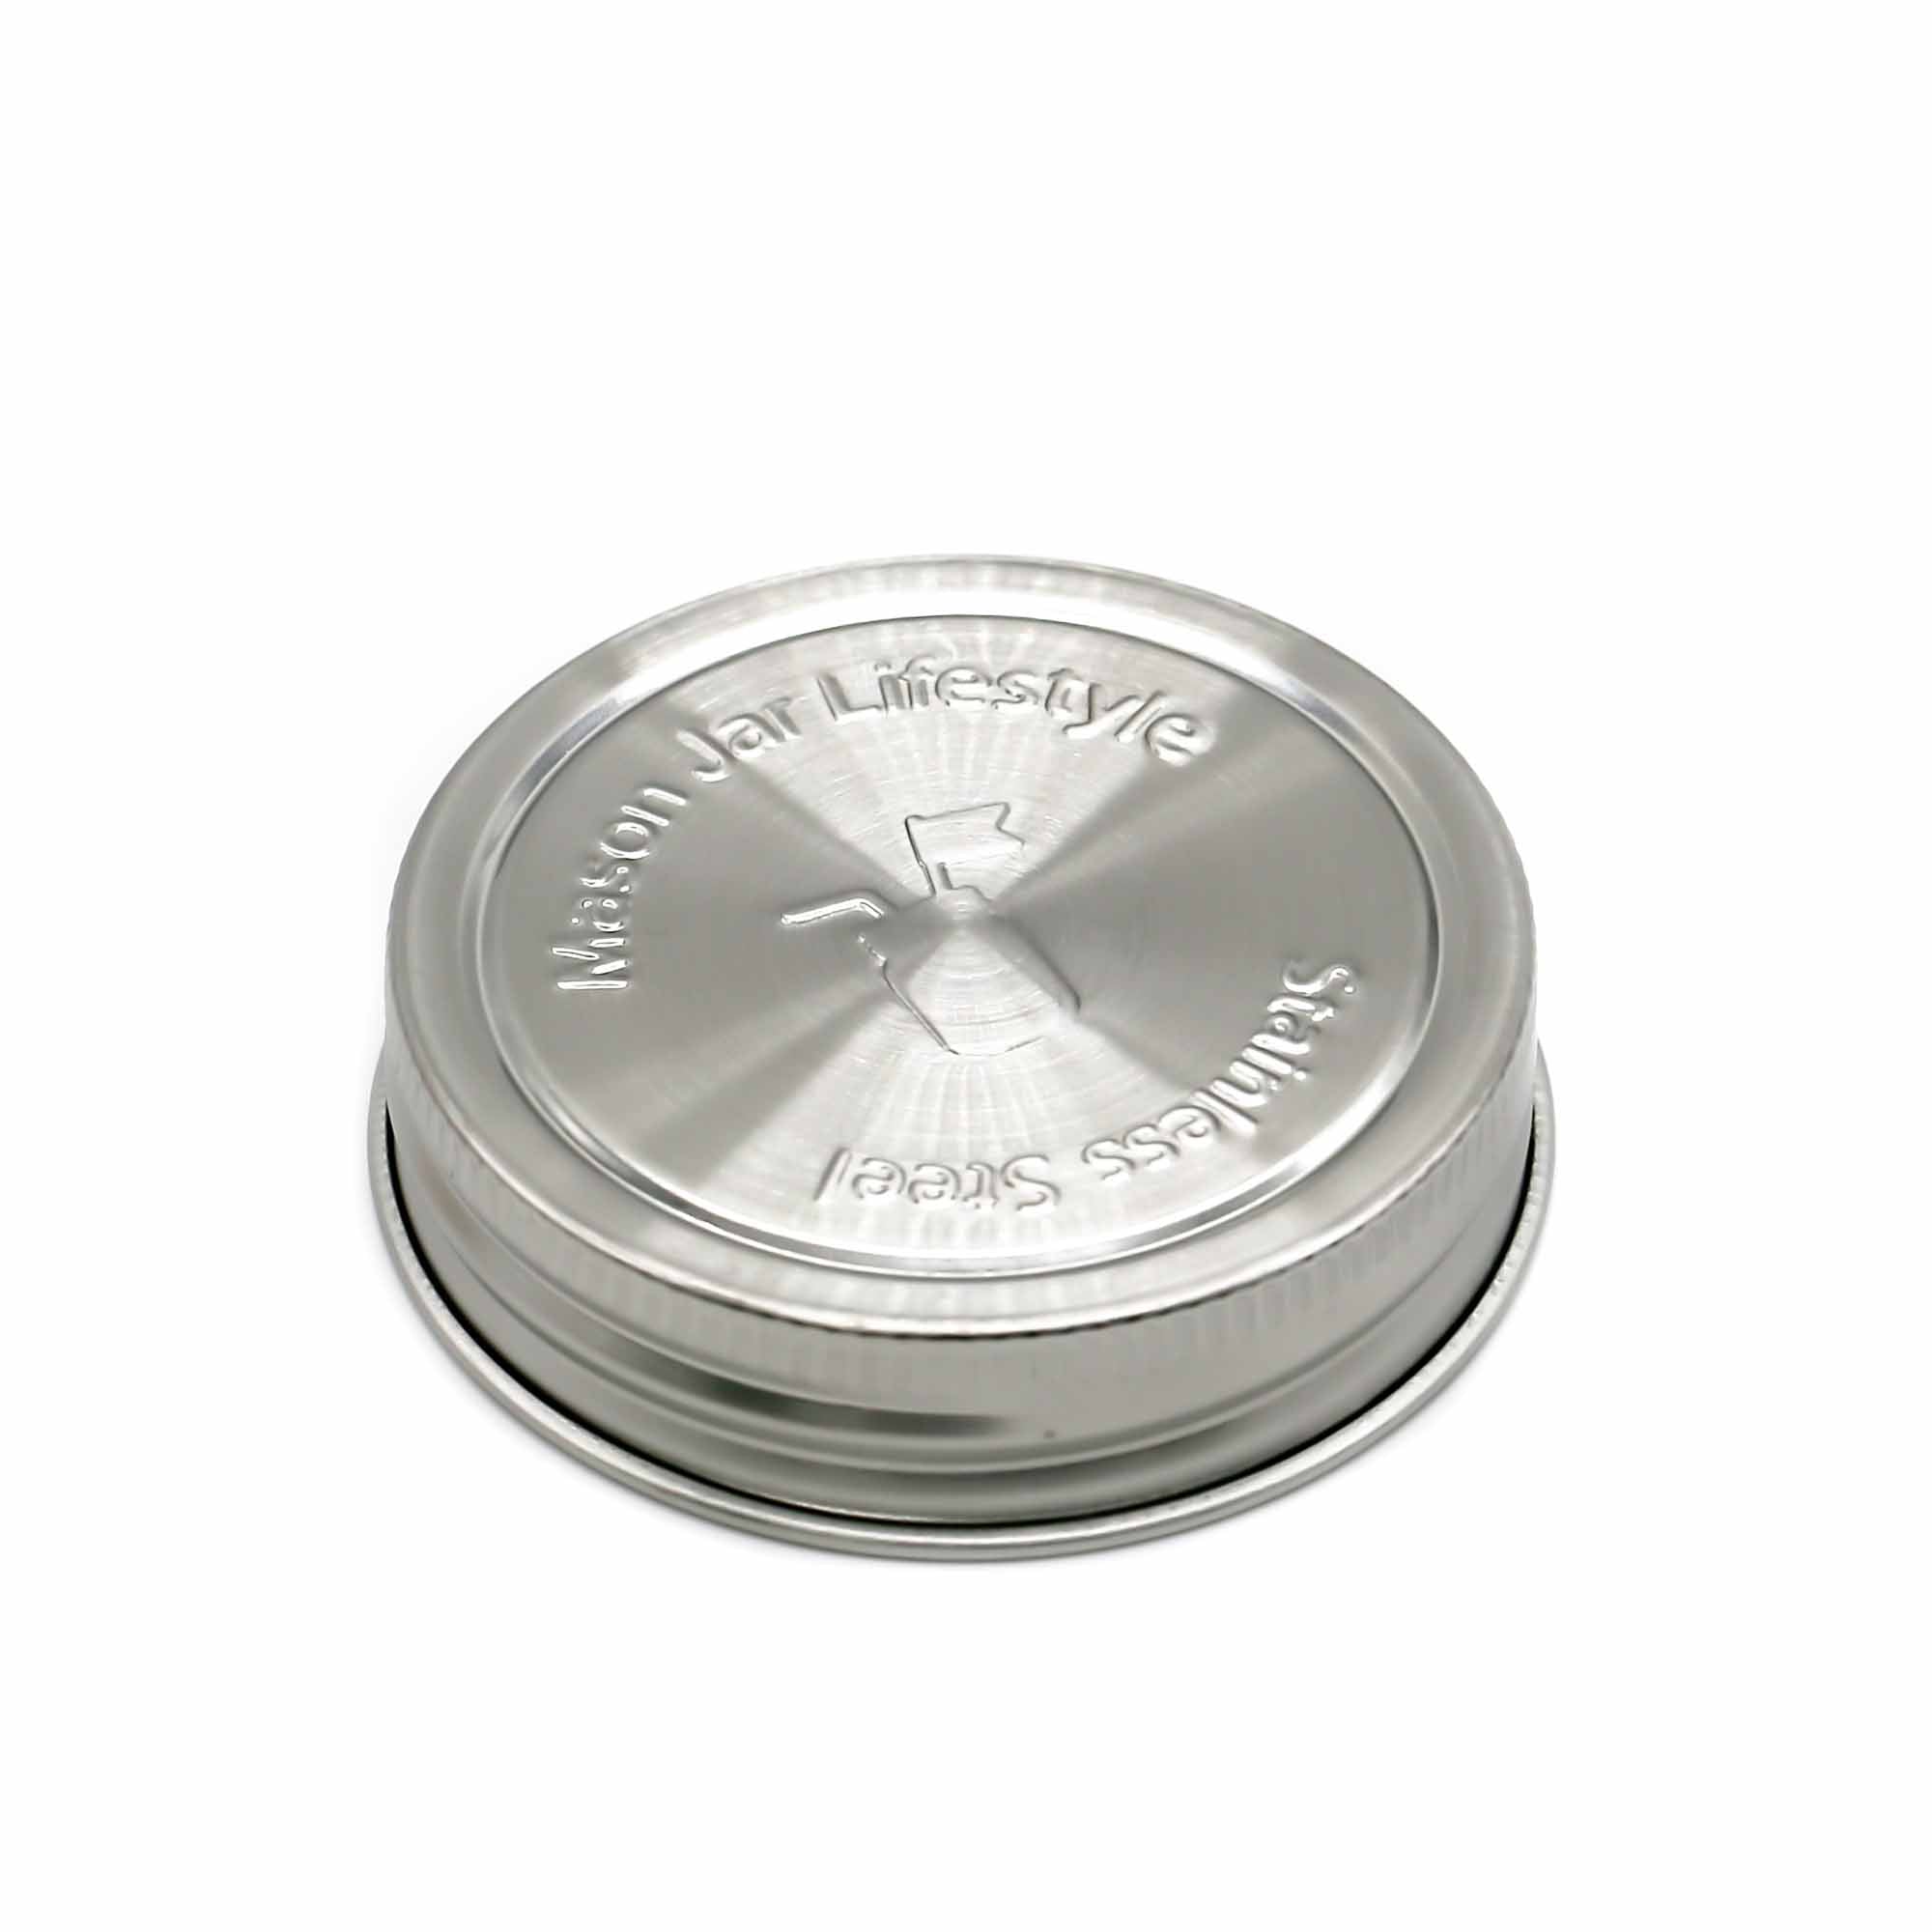 Stainless Steel Storage Lids with Silicone Seals for Mason Jars - Mortise And Tenon